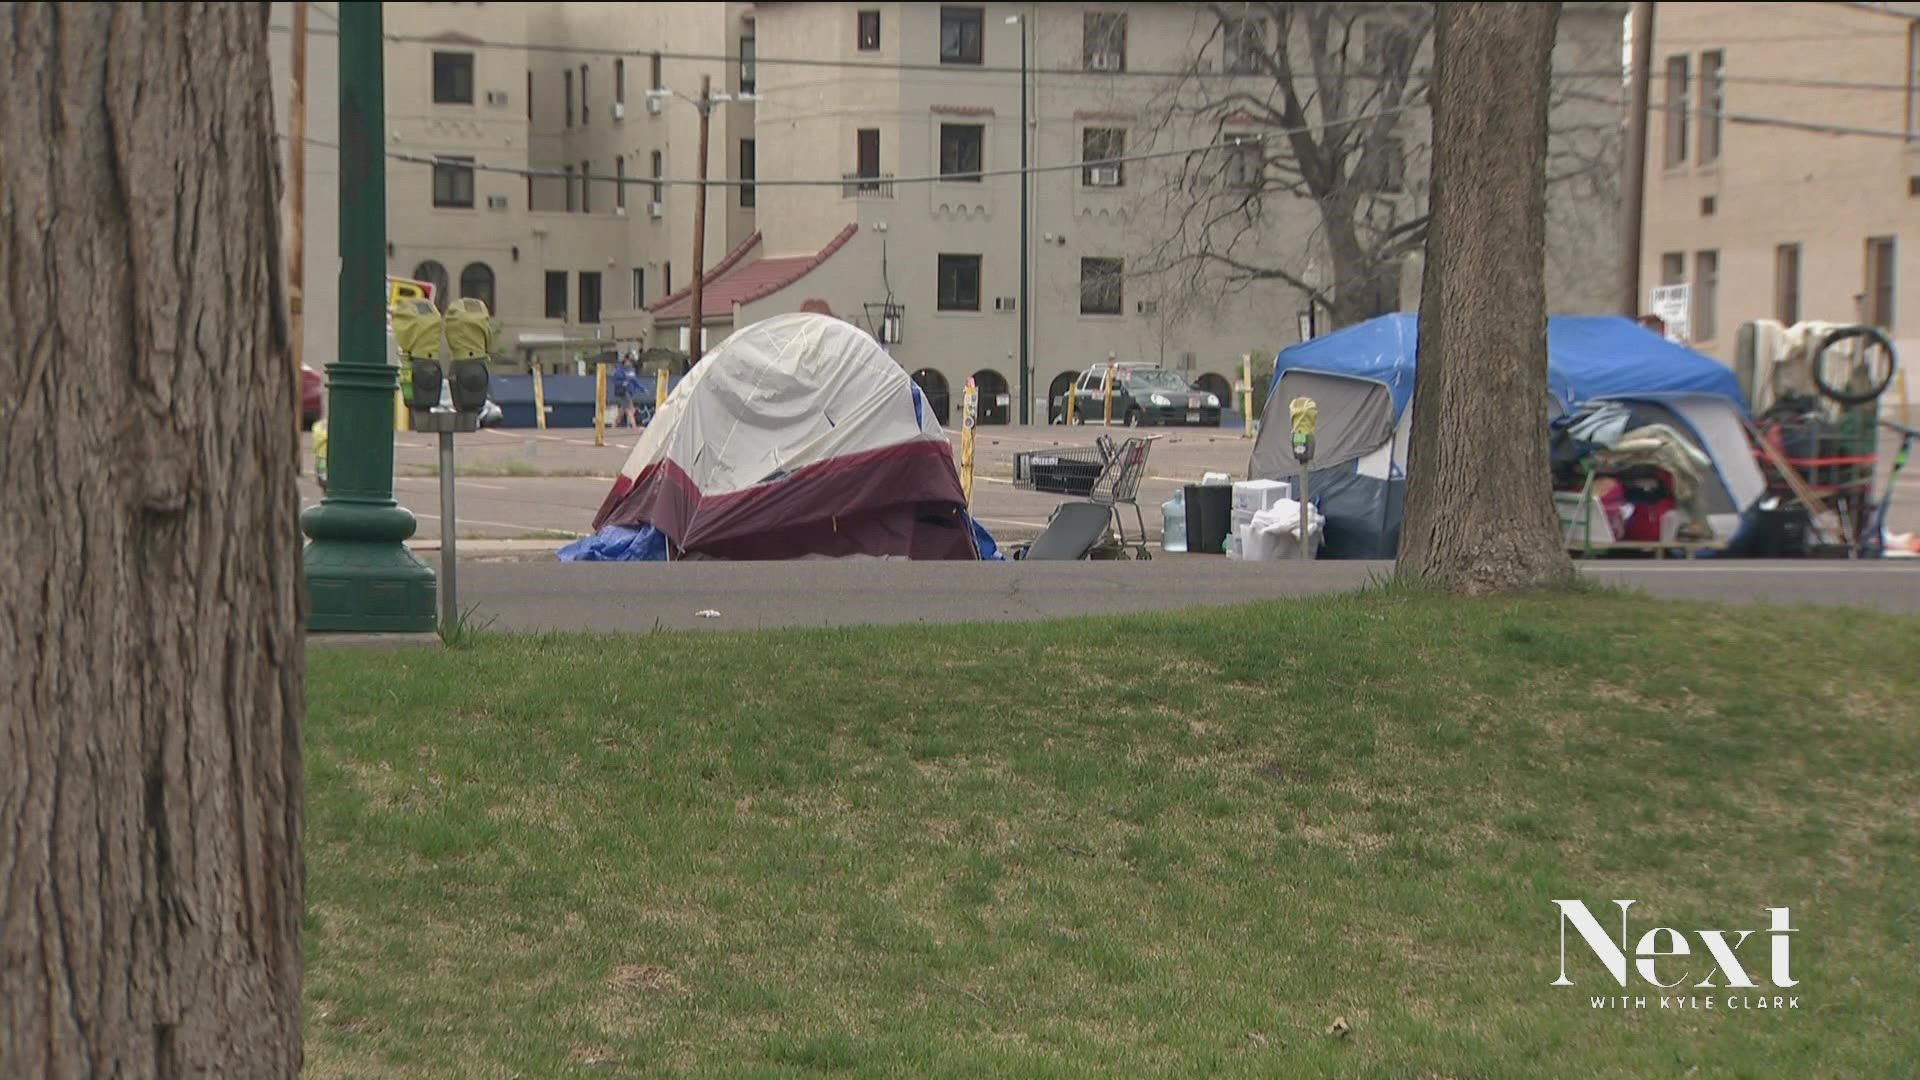 The city approved putting $2 million toward donations to individuals experiencing homelessness.